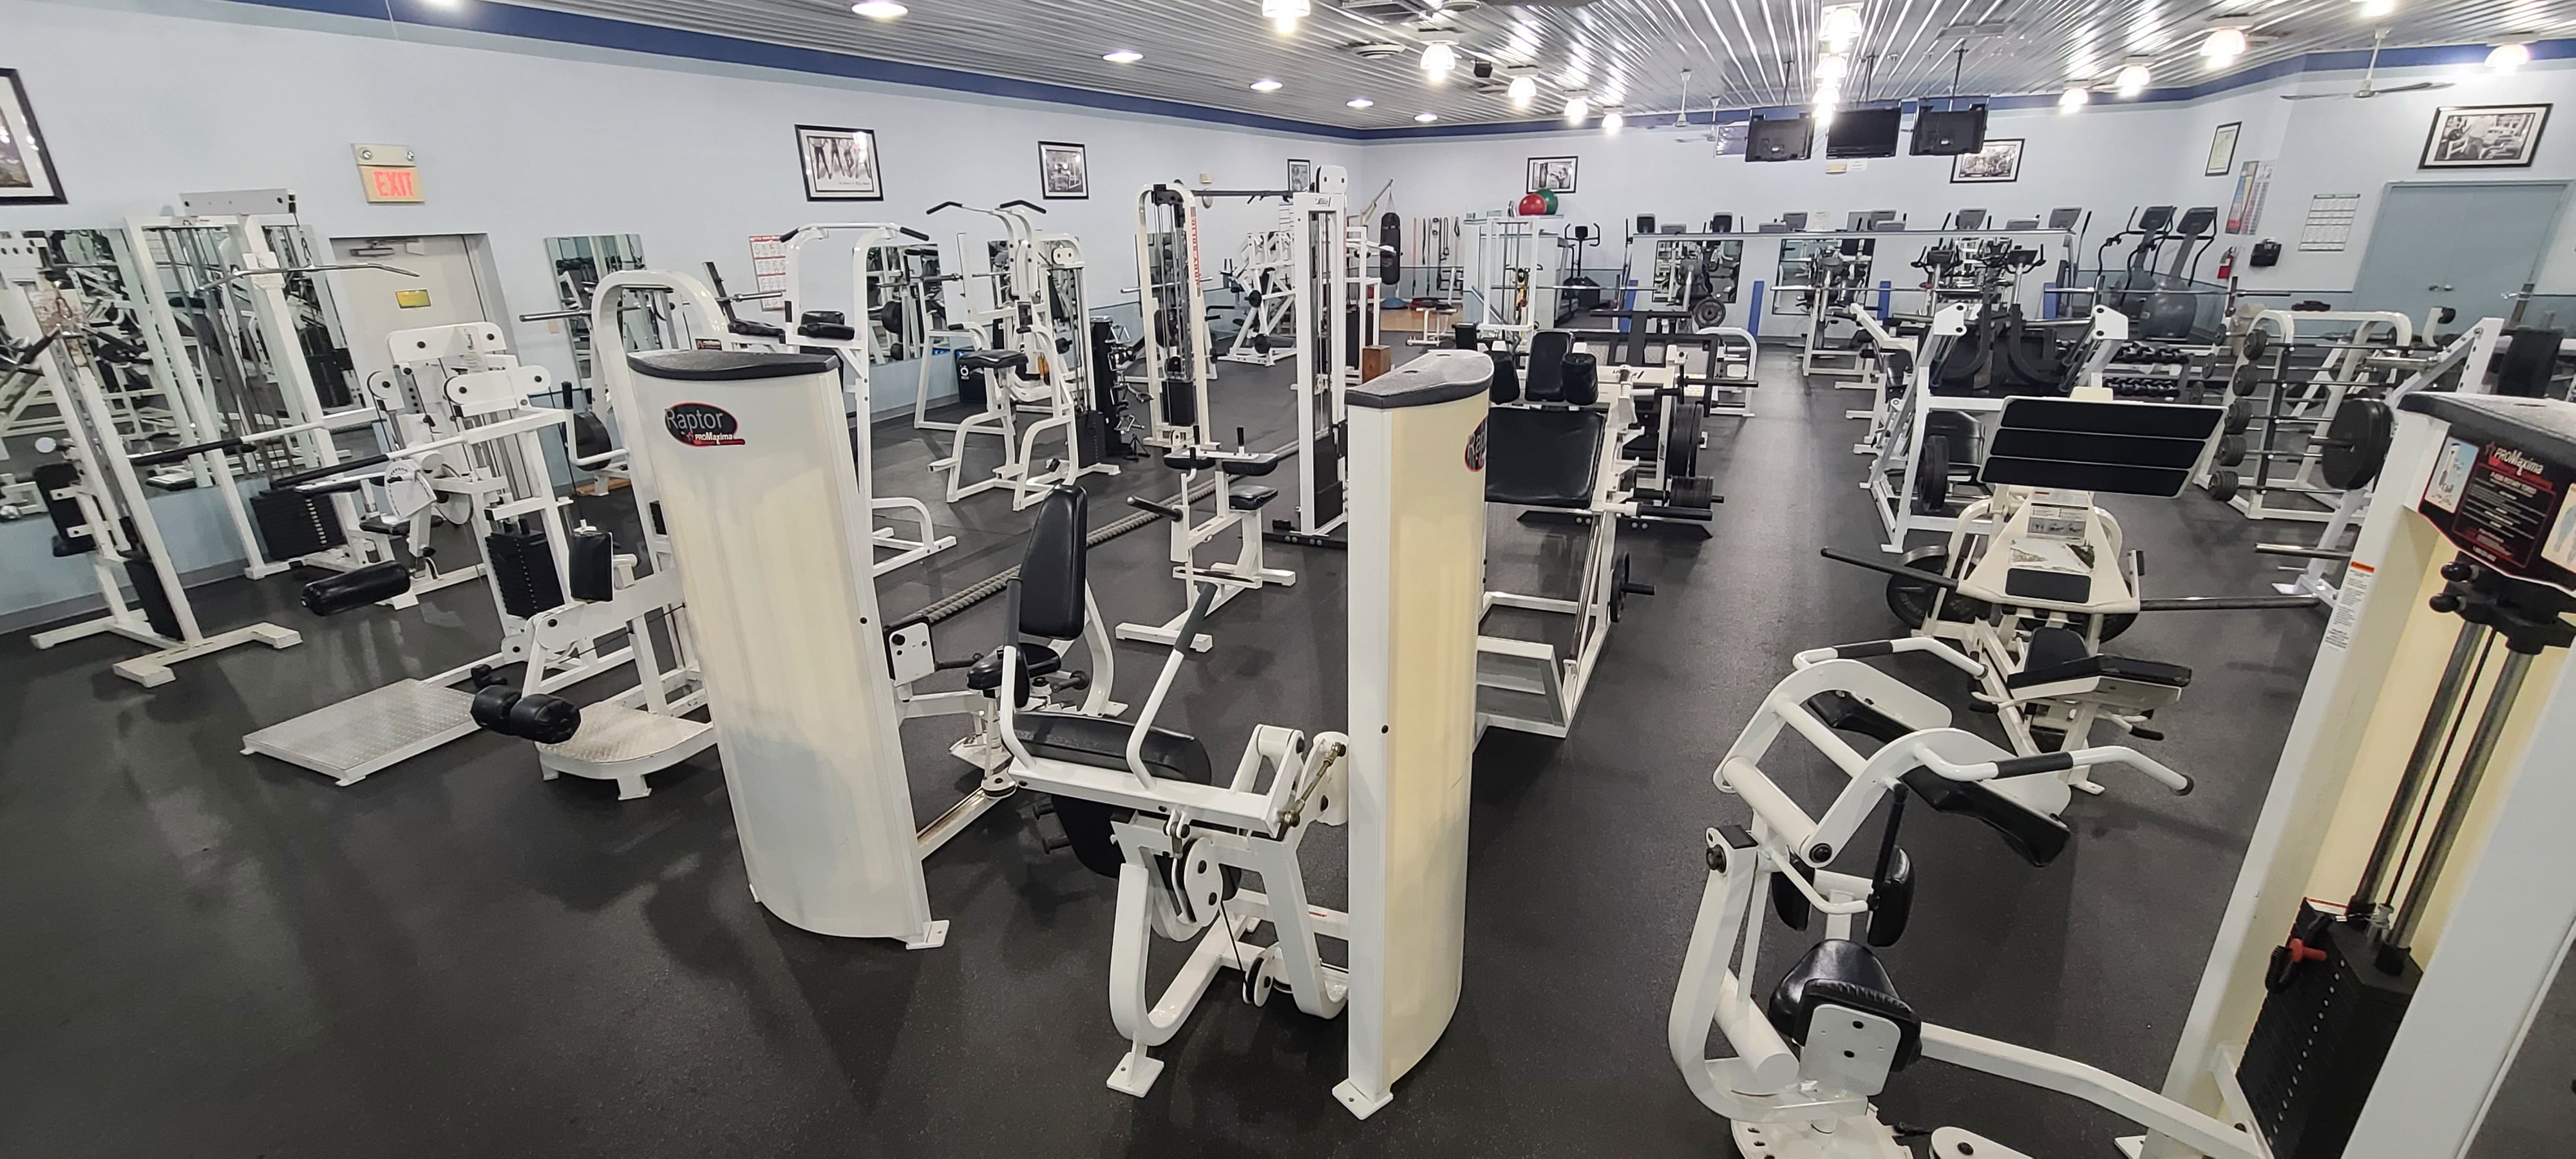 a room of weight training equipment